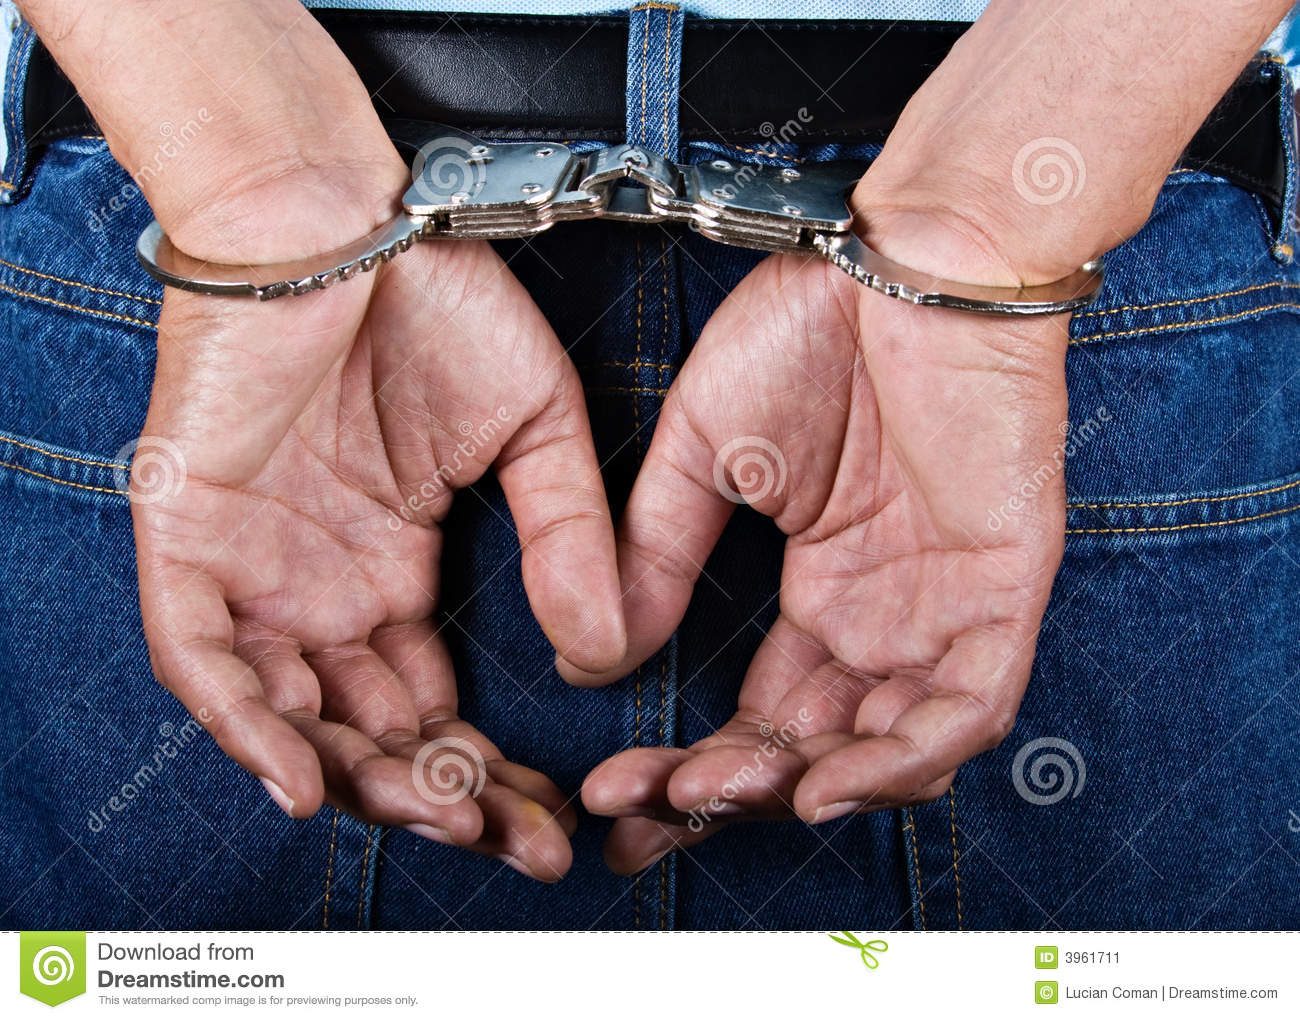 Man Handcuffed Hands At The Back 